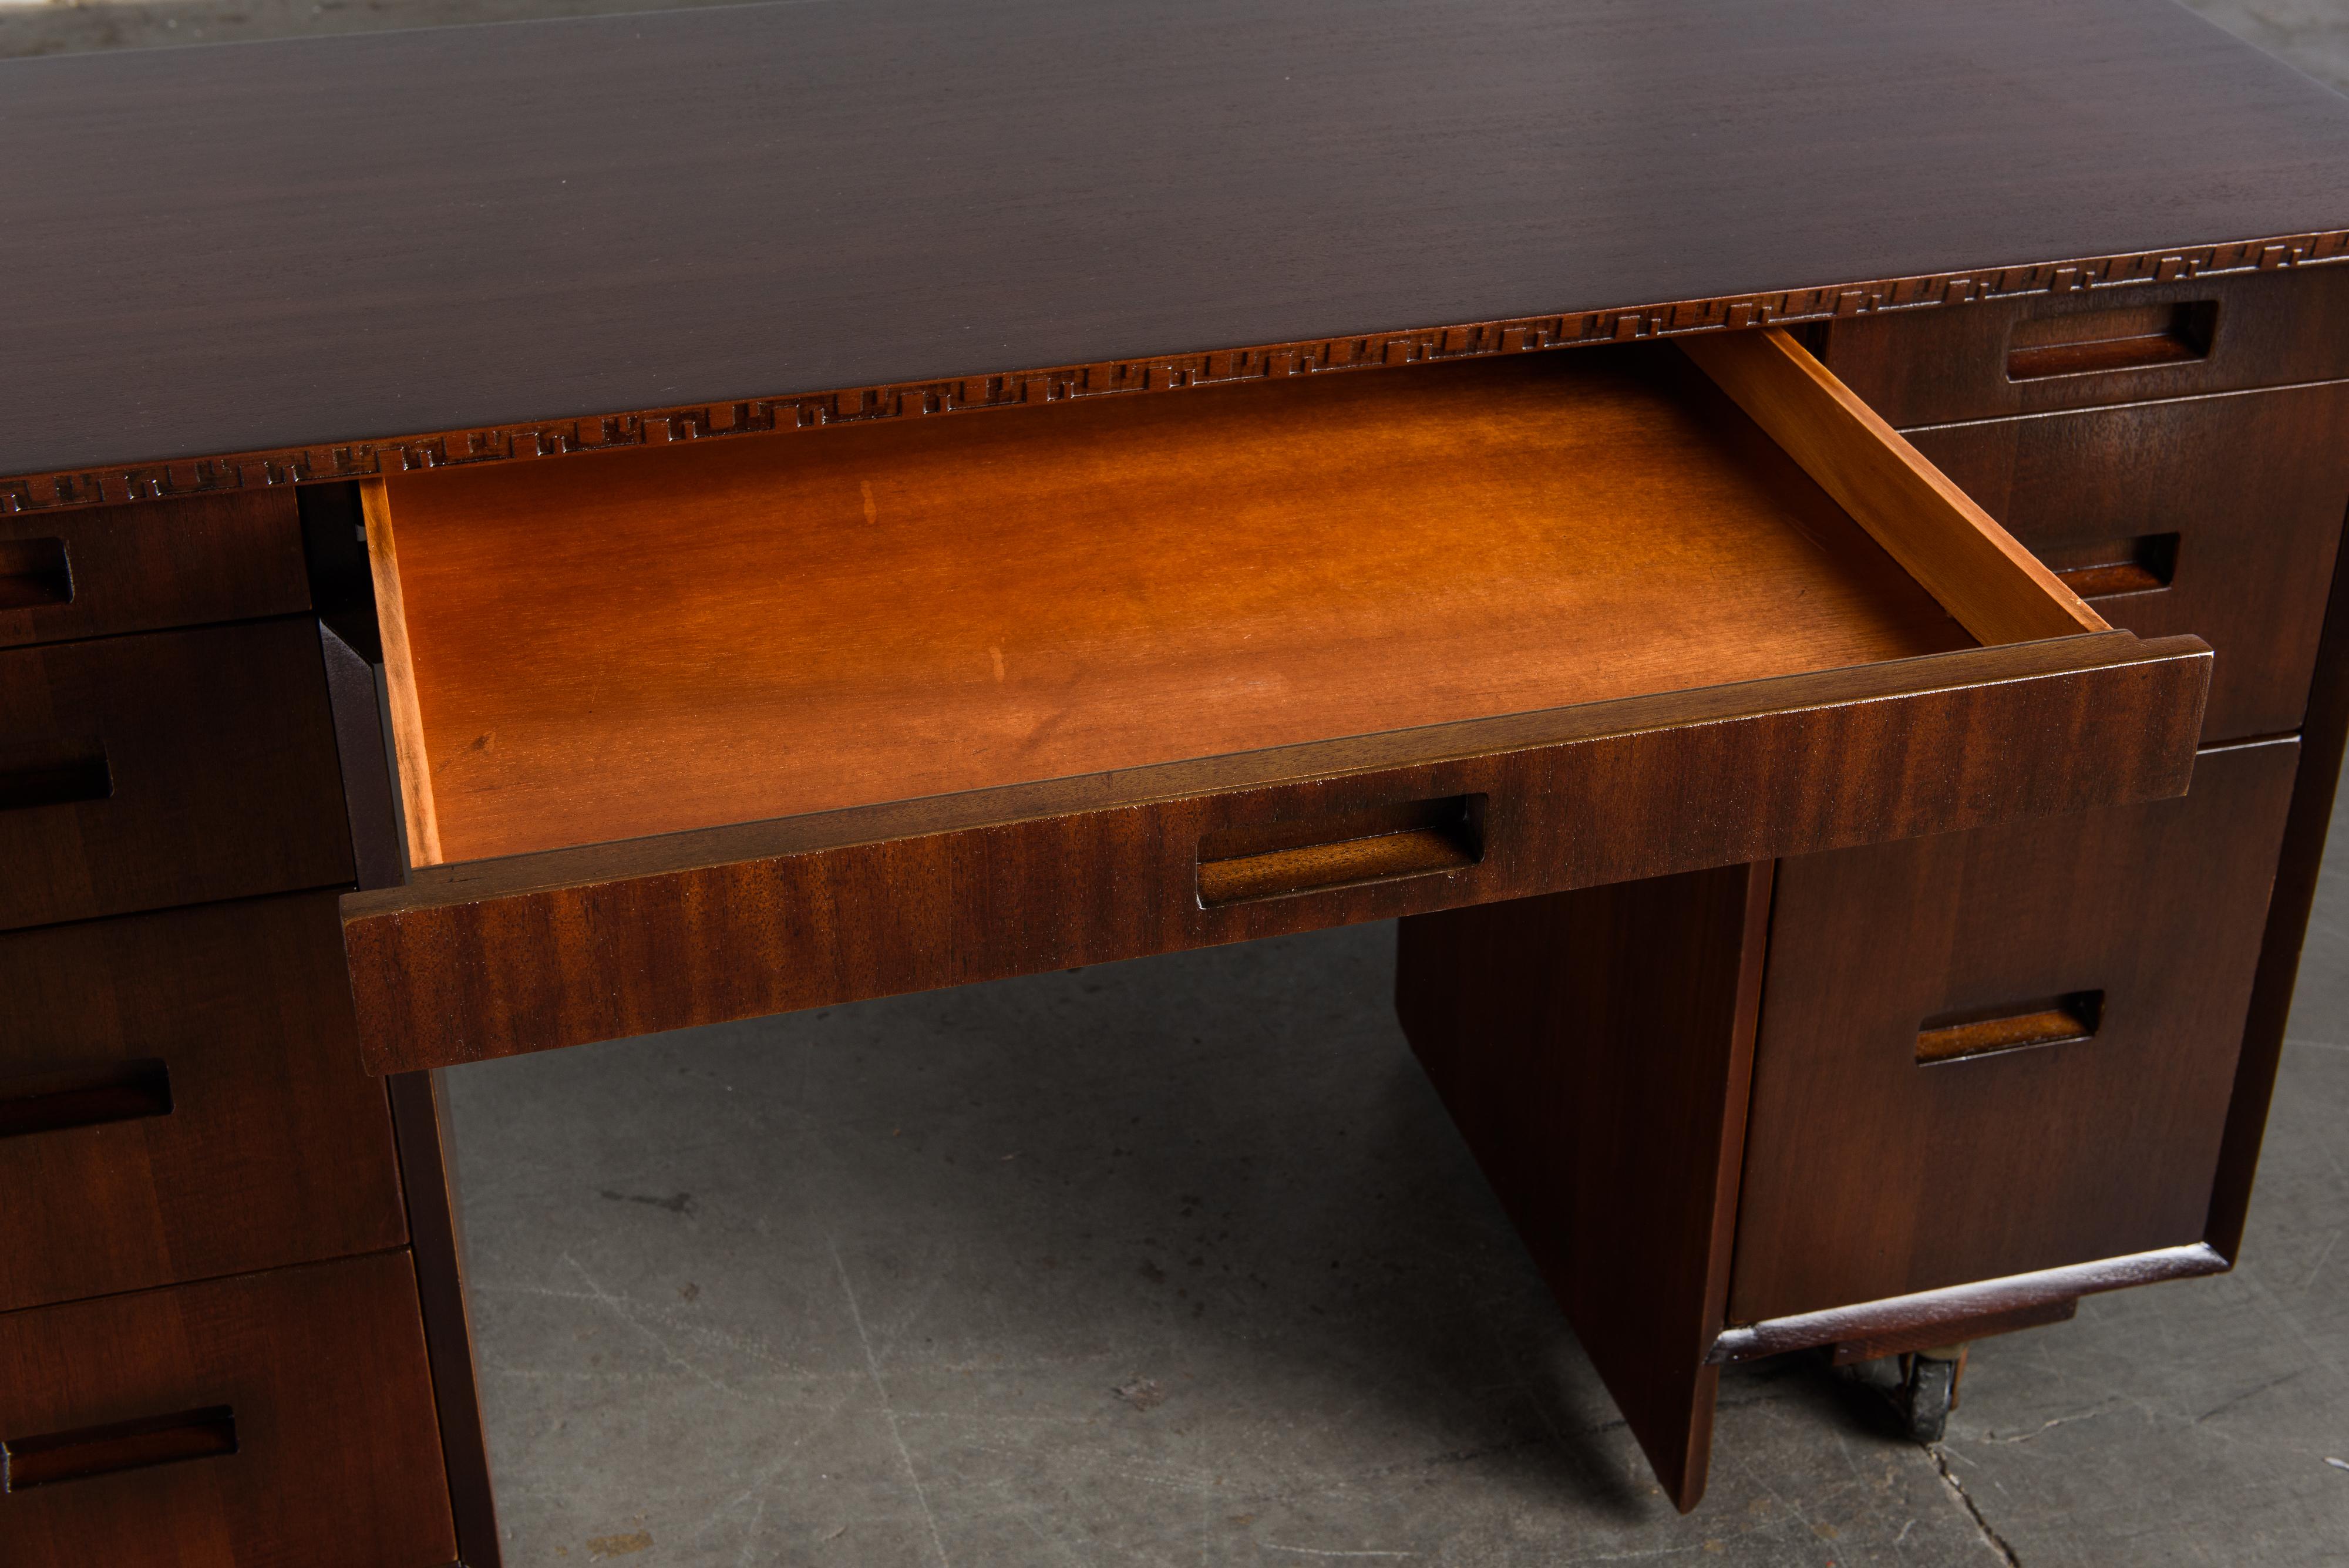 'Taliesin' Mahogany Desk with Pull-Out Table by Frank Lloyd Wright, 1955, Signed 6